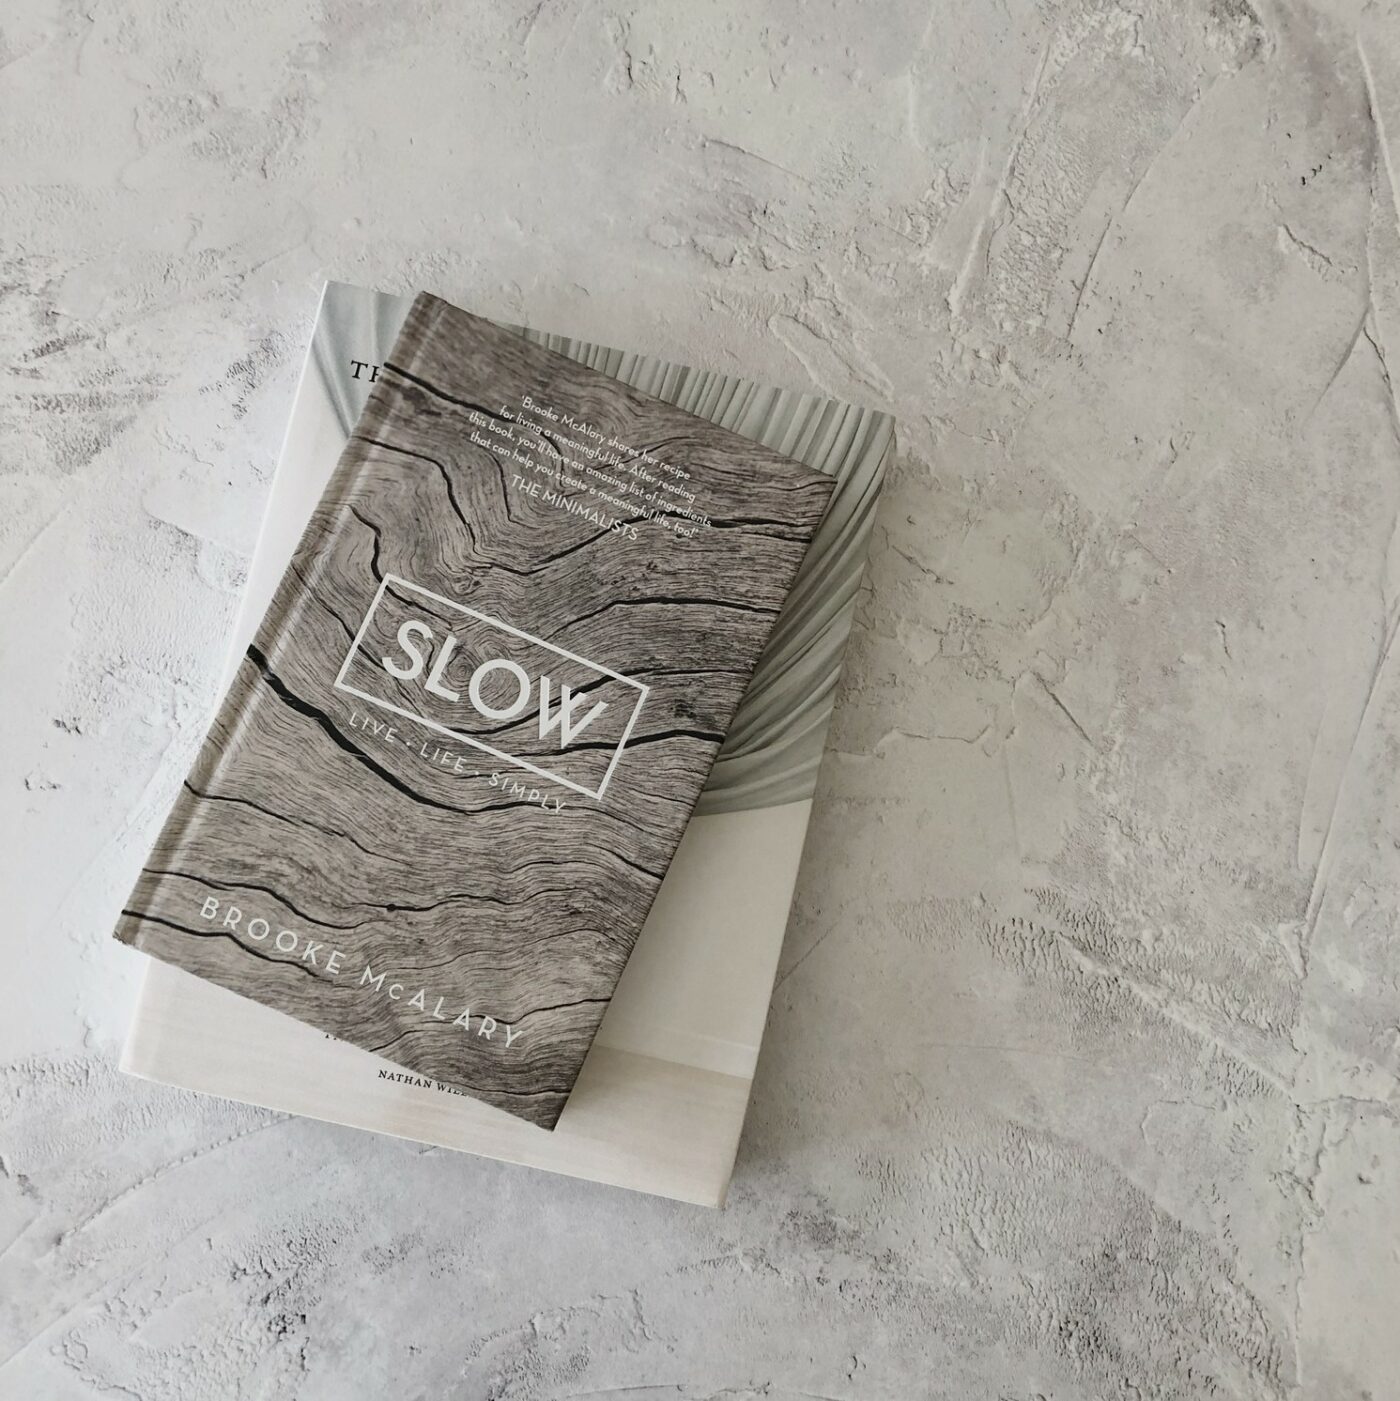 6 Slow Living Lessons from SLOW by Brooke McAlary